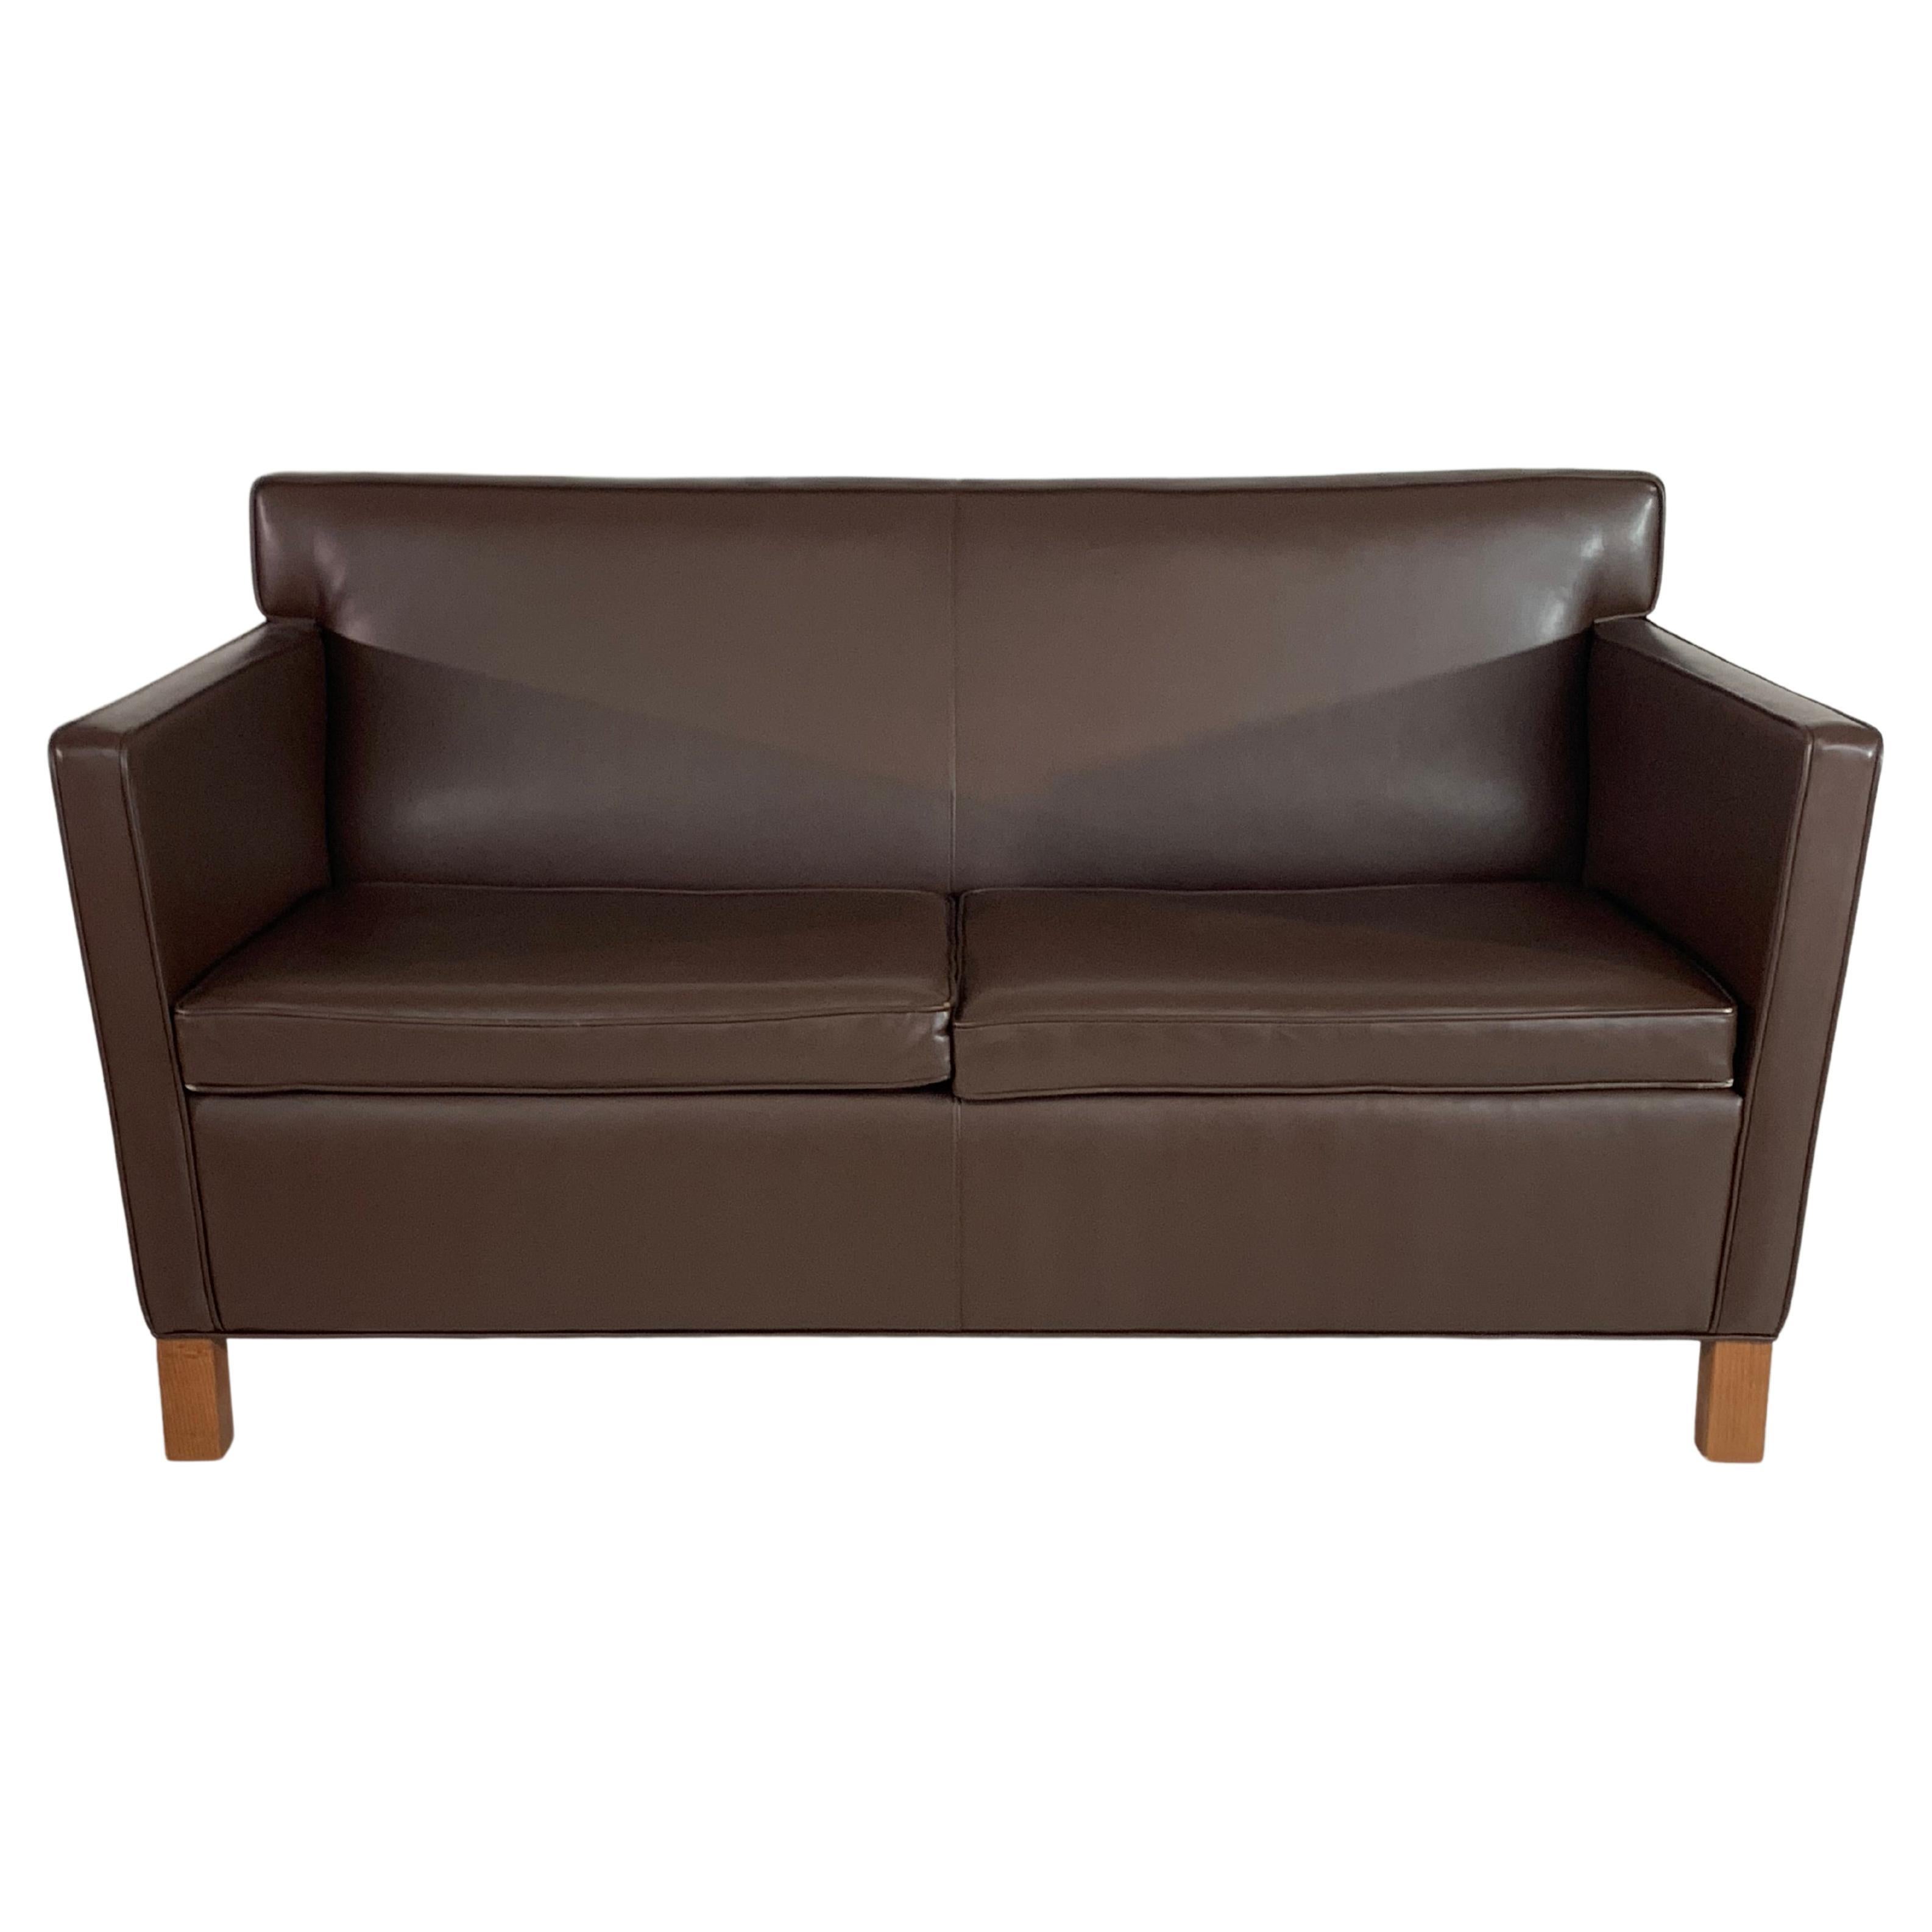 Ludwig Mies van der Rohe Krefeld Settee or Sofa in Dark Brown Leather for Knoll For Sale